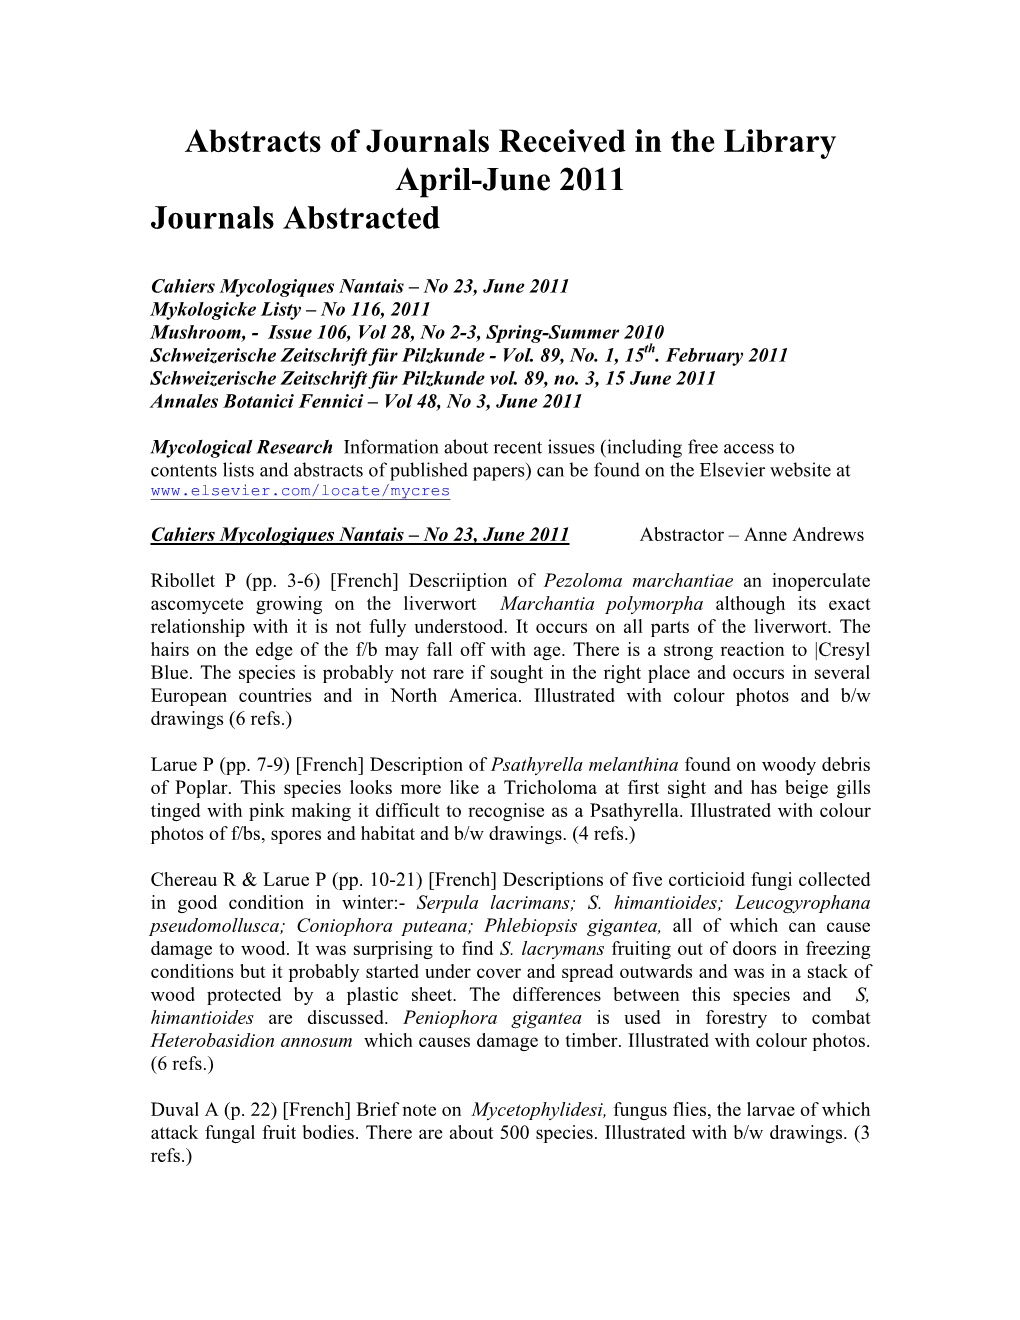 Abstracts of Journals Received in the Library April-June 2011 Journals Abstracted